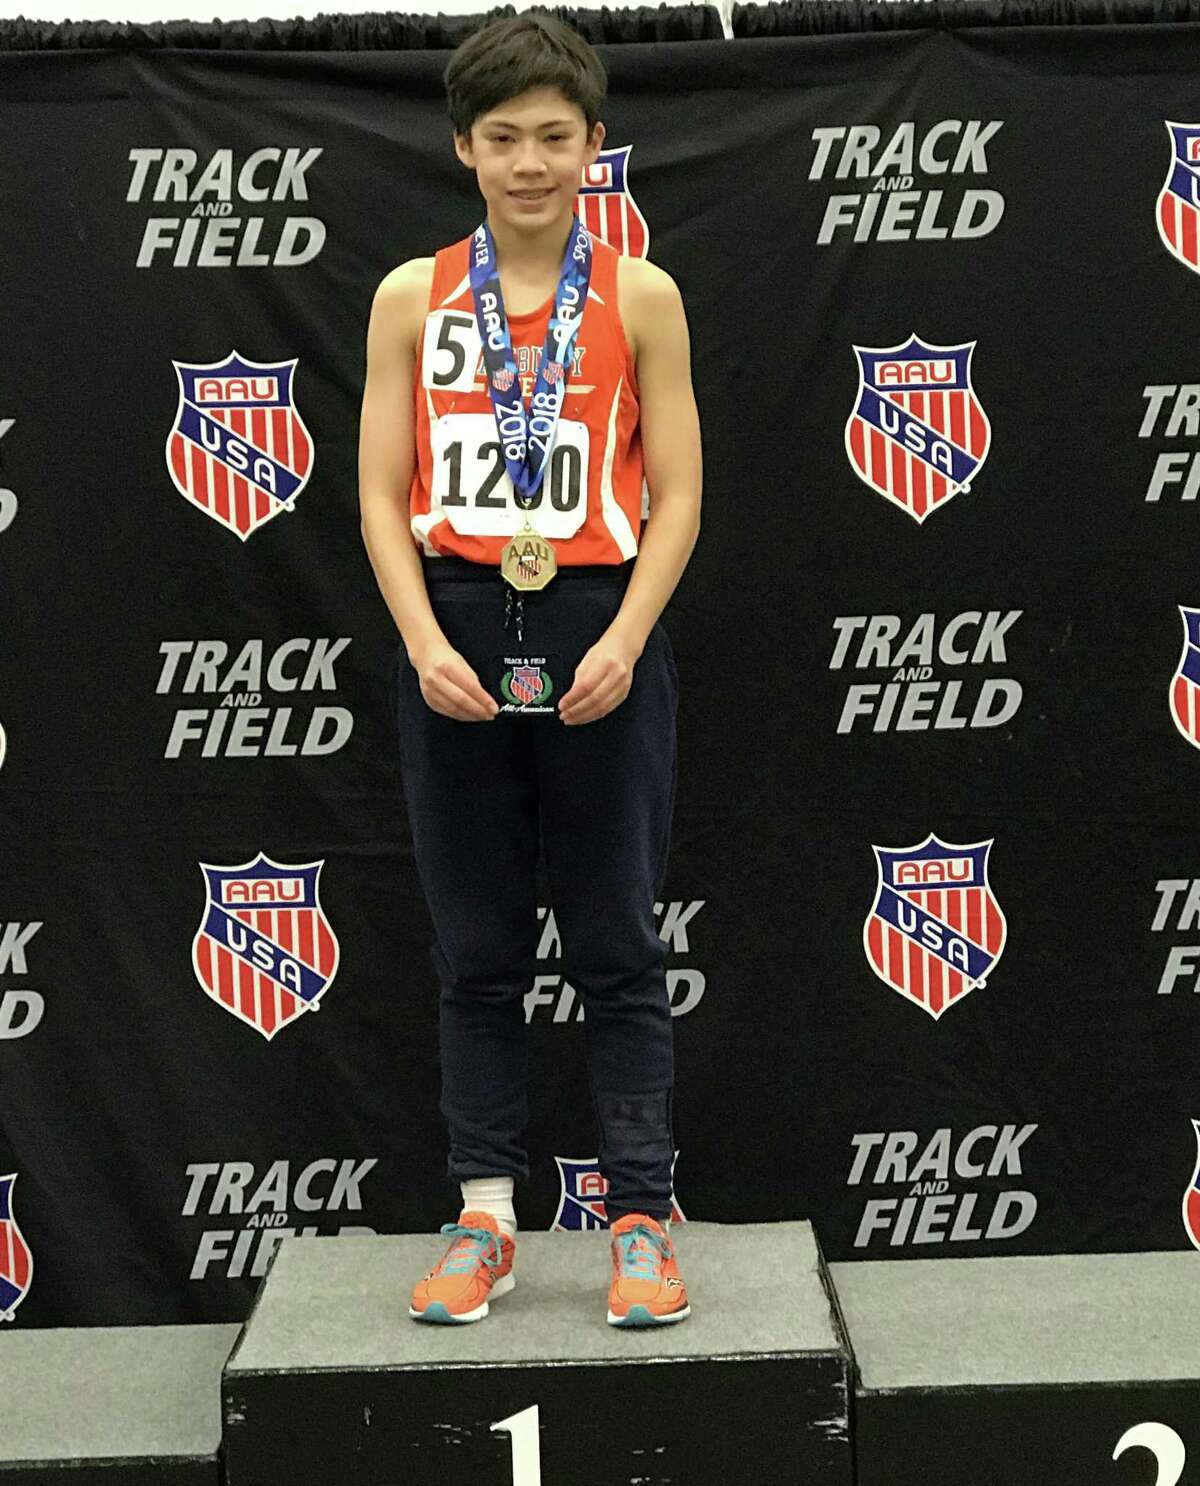 12-year-old Max Coisman won the 3,000-meter racewalk at the AAU National Championships, held last weekend in Landover, Maryland.